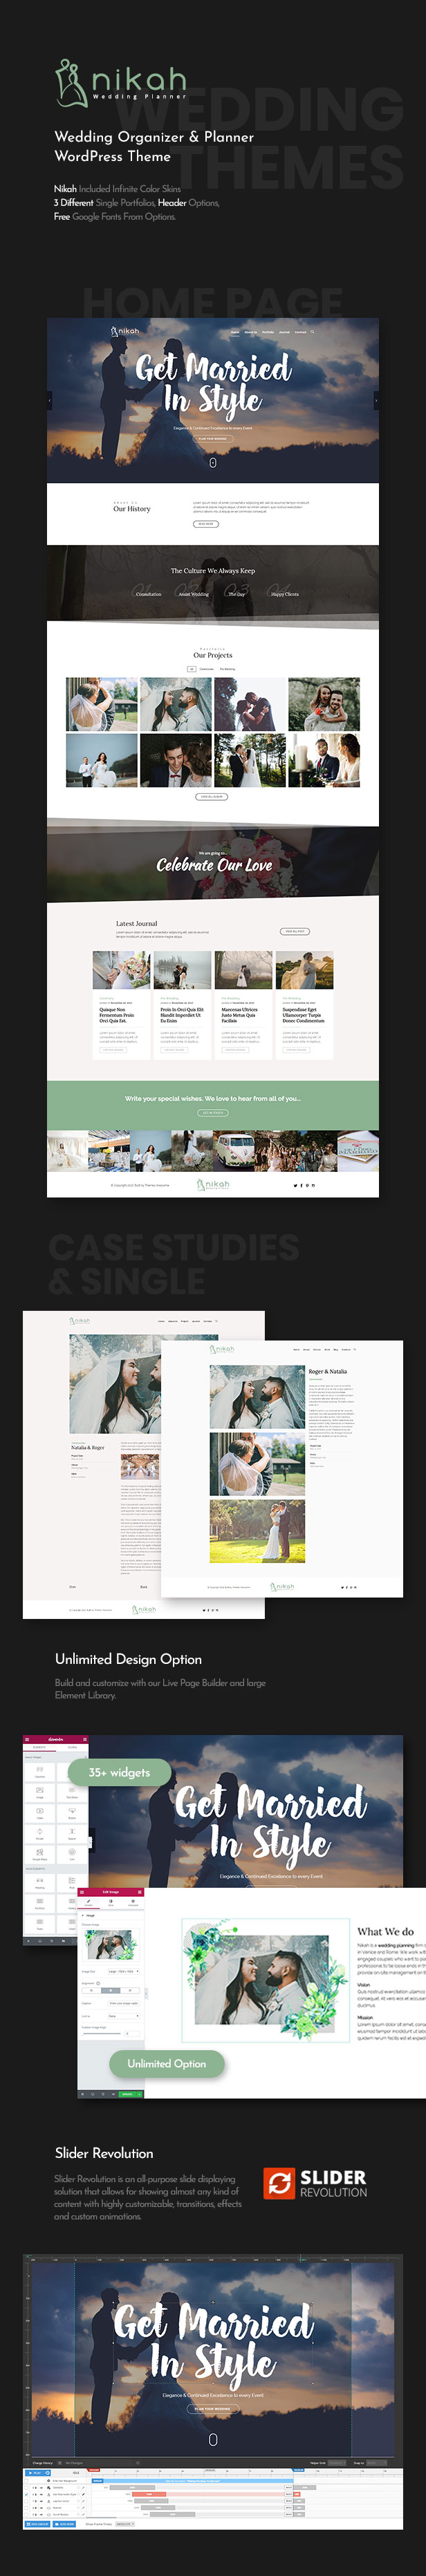 Site template pages.